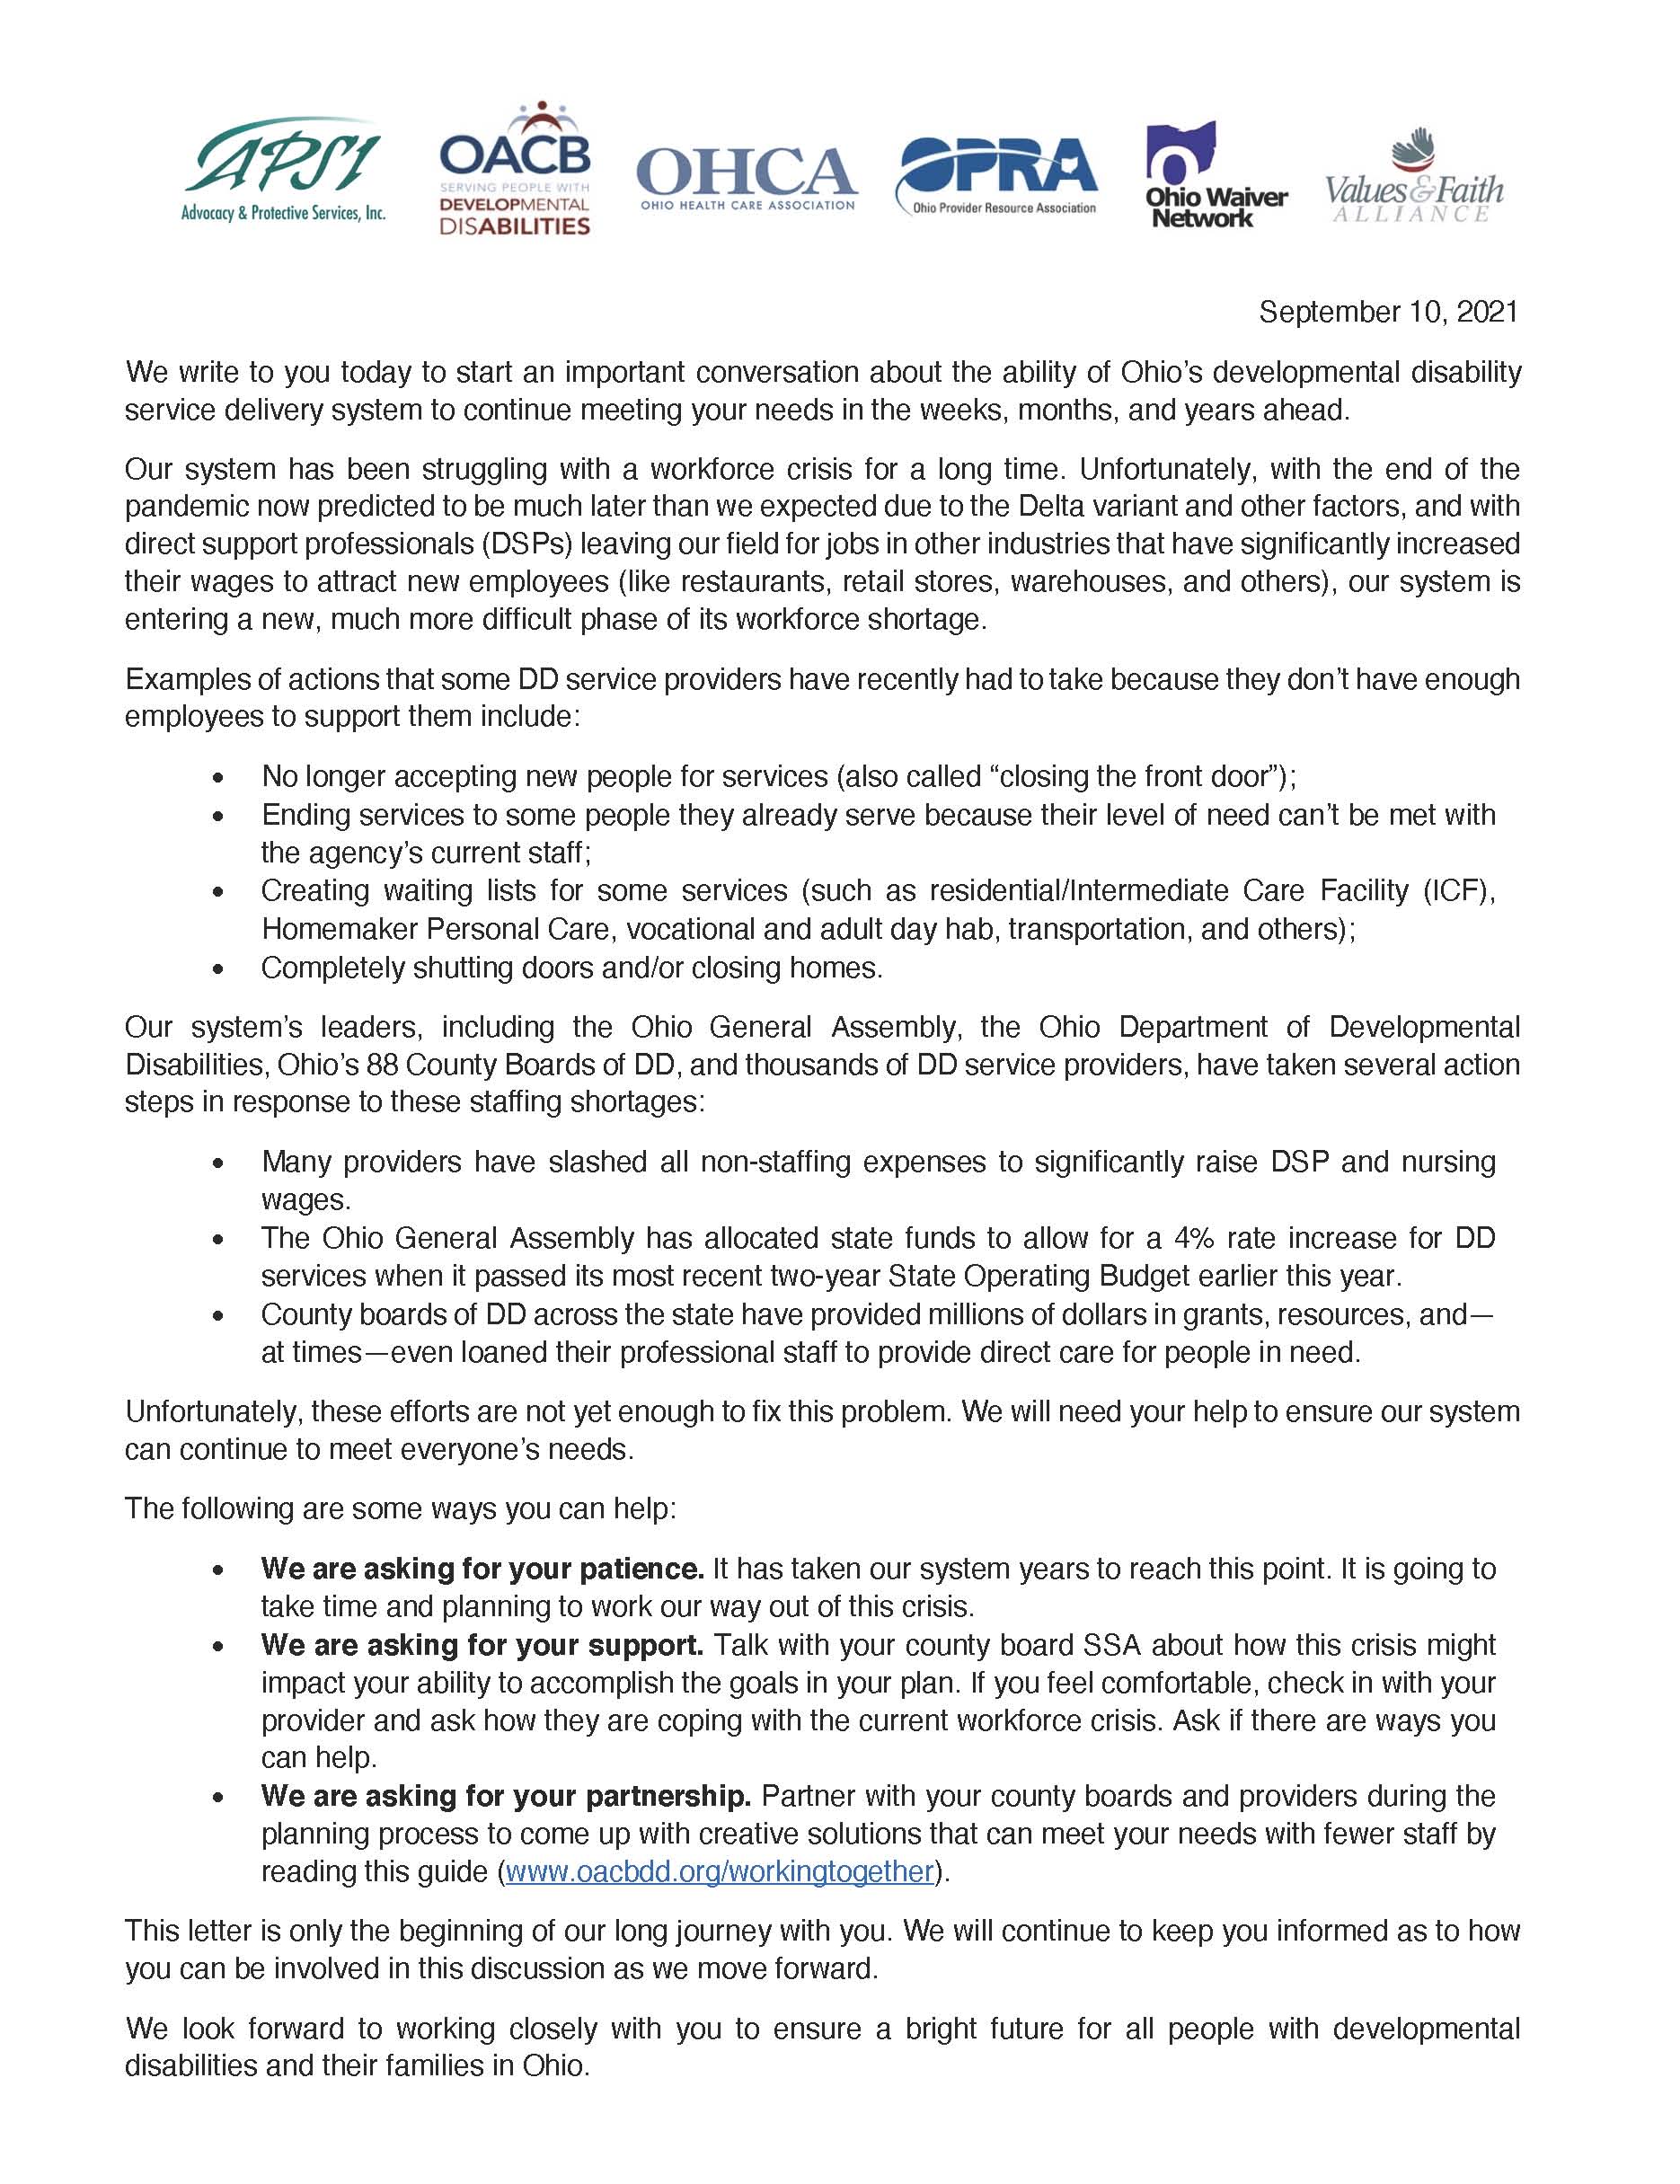 workforce-crisis-statewide-letter